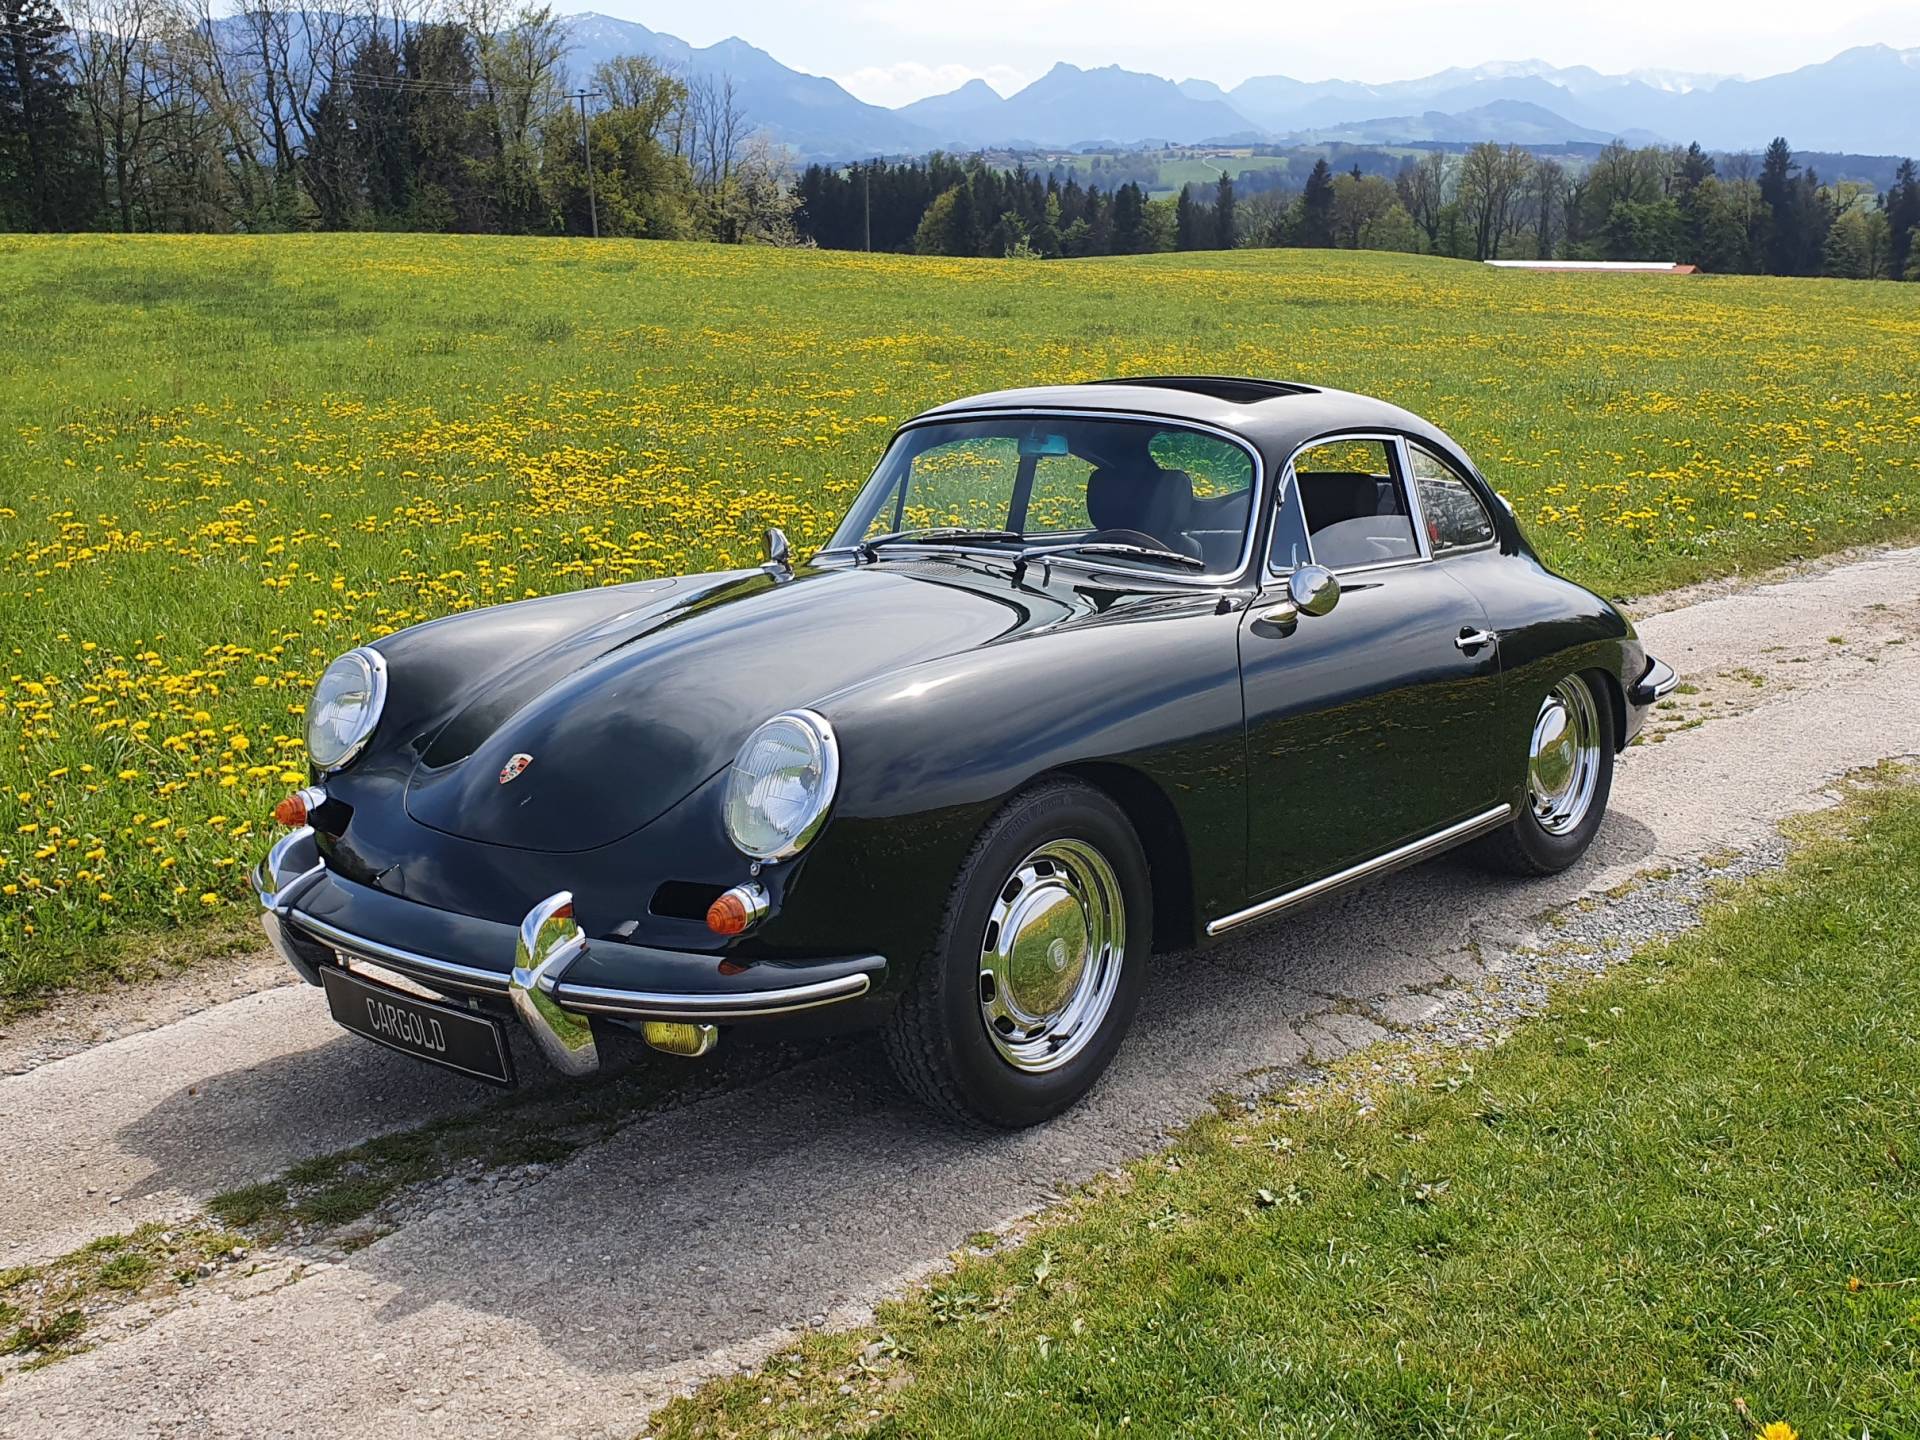 For Sale: Porsche 356 B Carrera 2/2000 GS (1962) offered for GBP 603,716